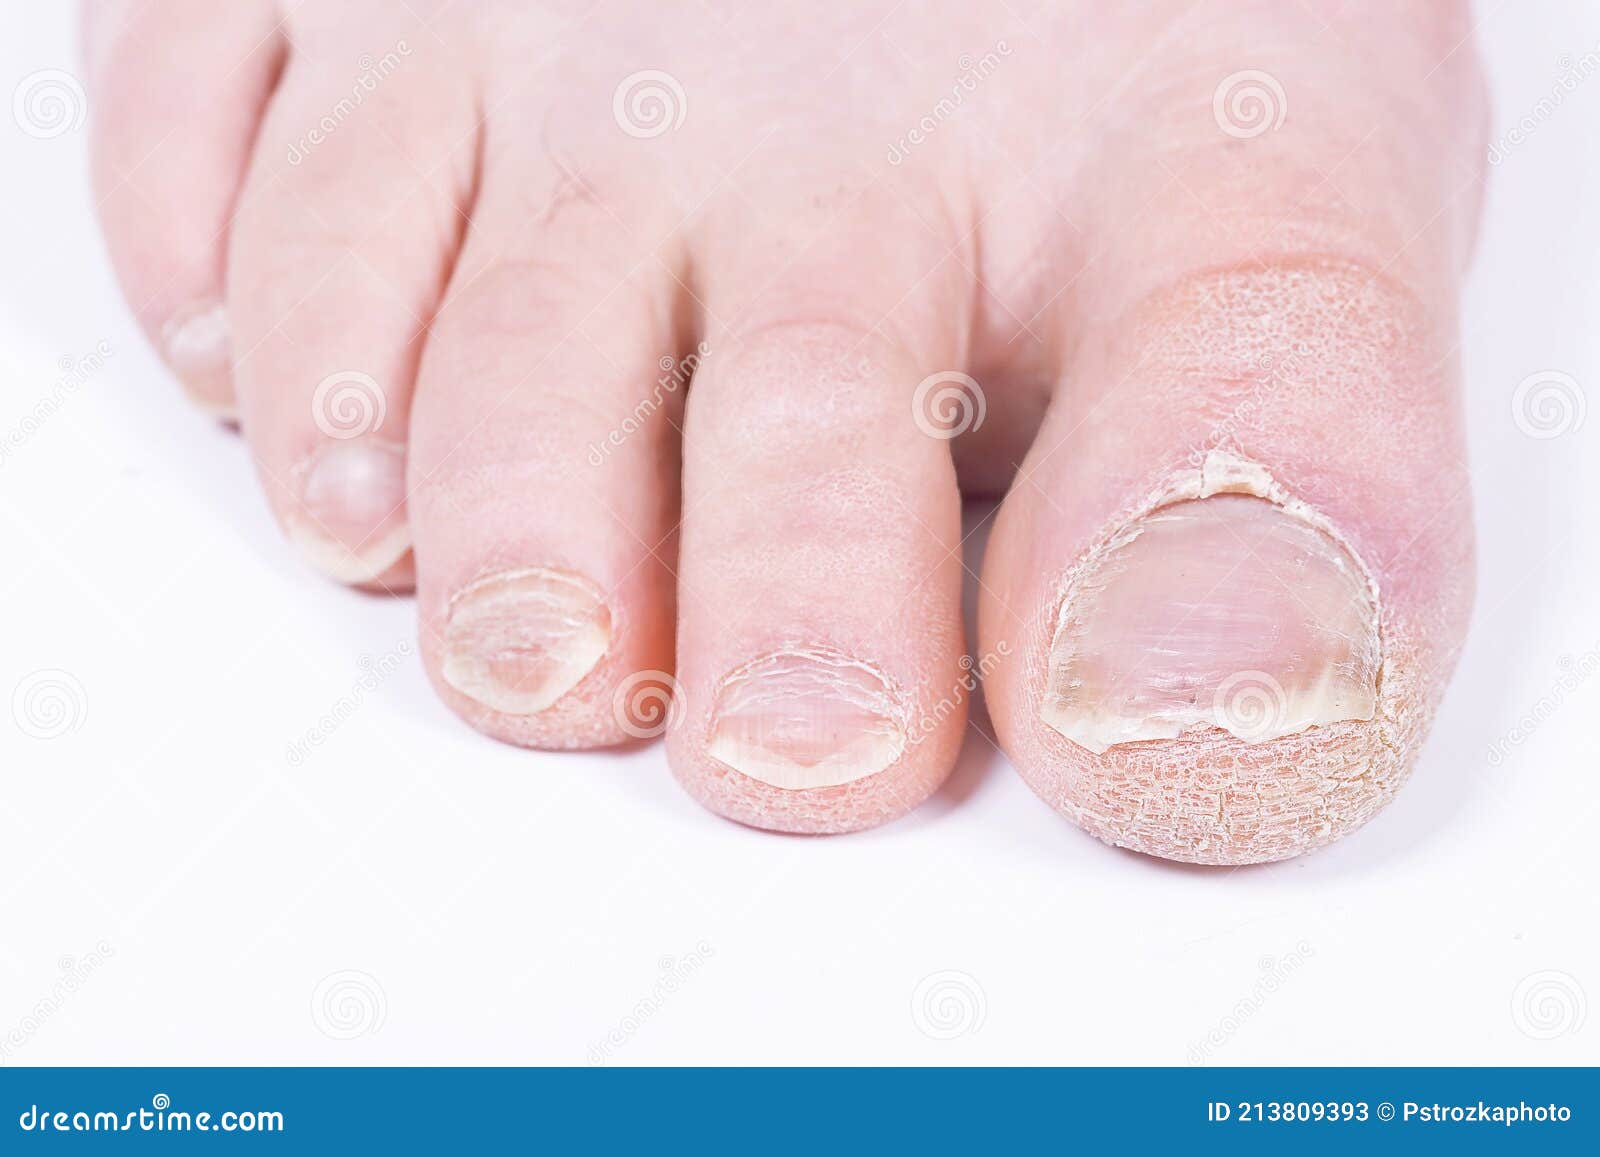 Female Feet with White Manicure Nails Stock Photo - Image of rose, foot:  230293400